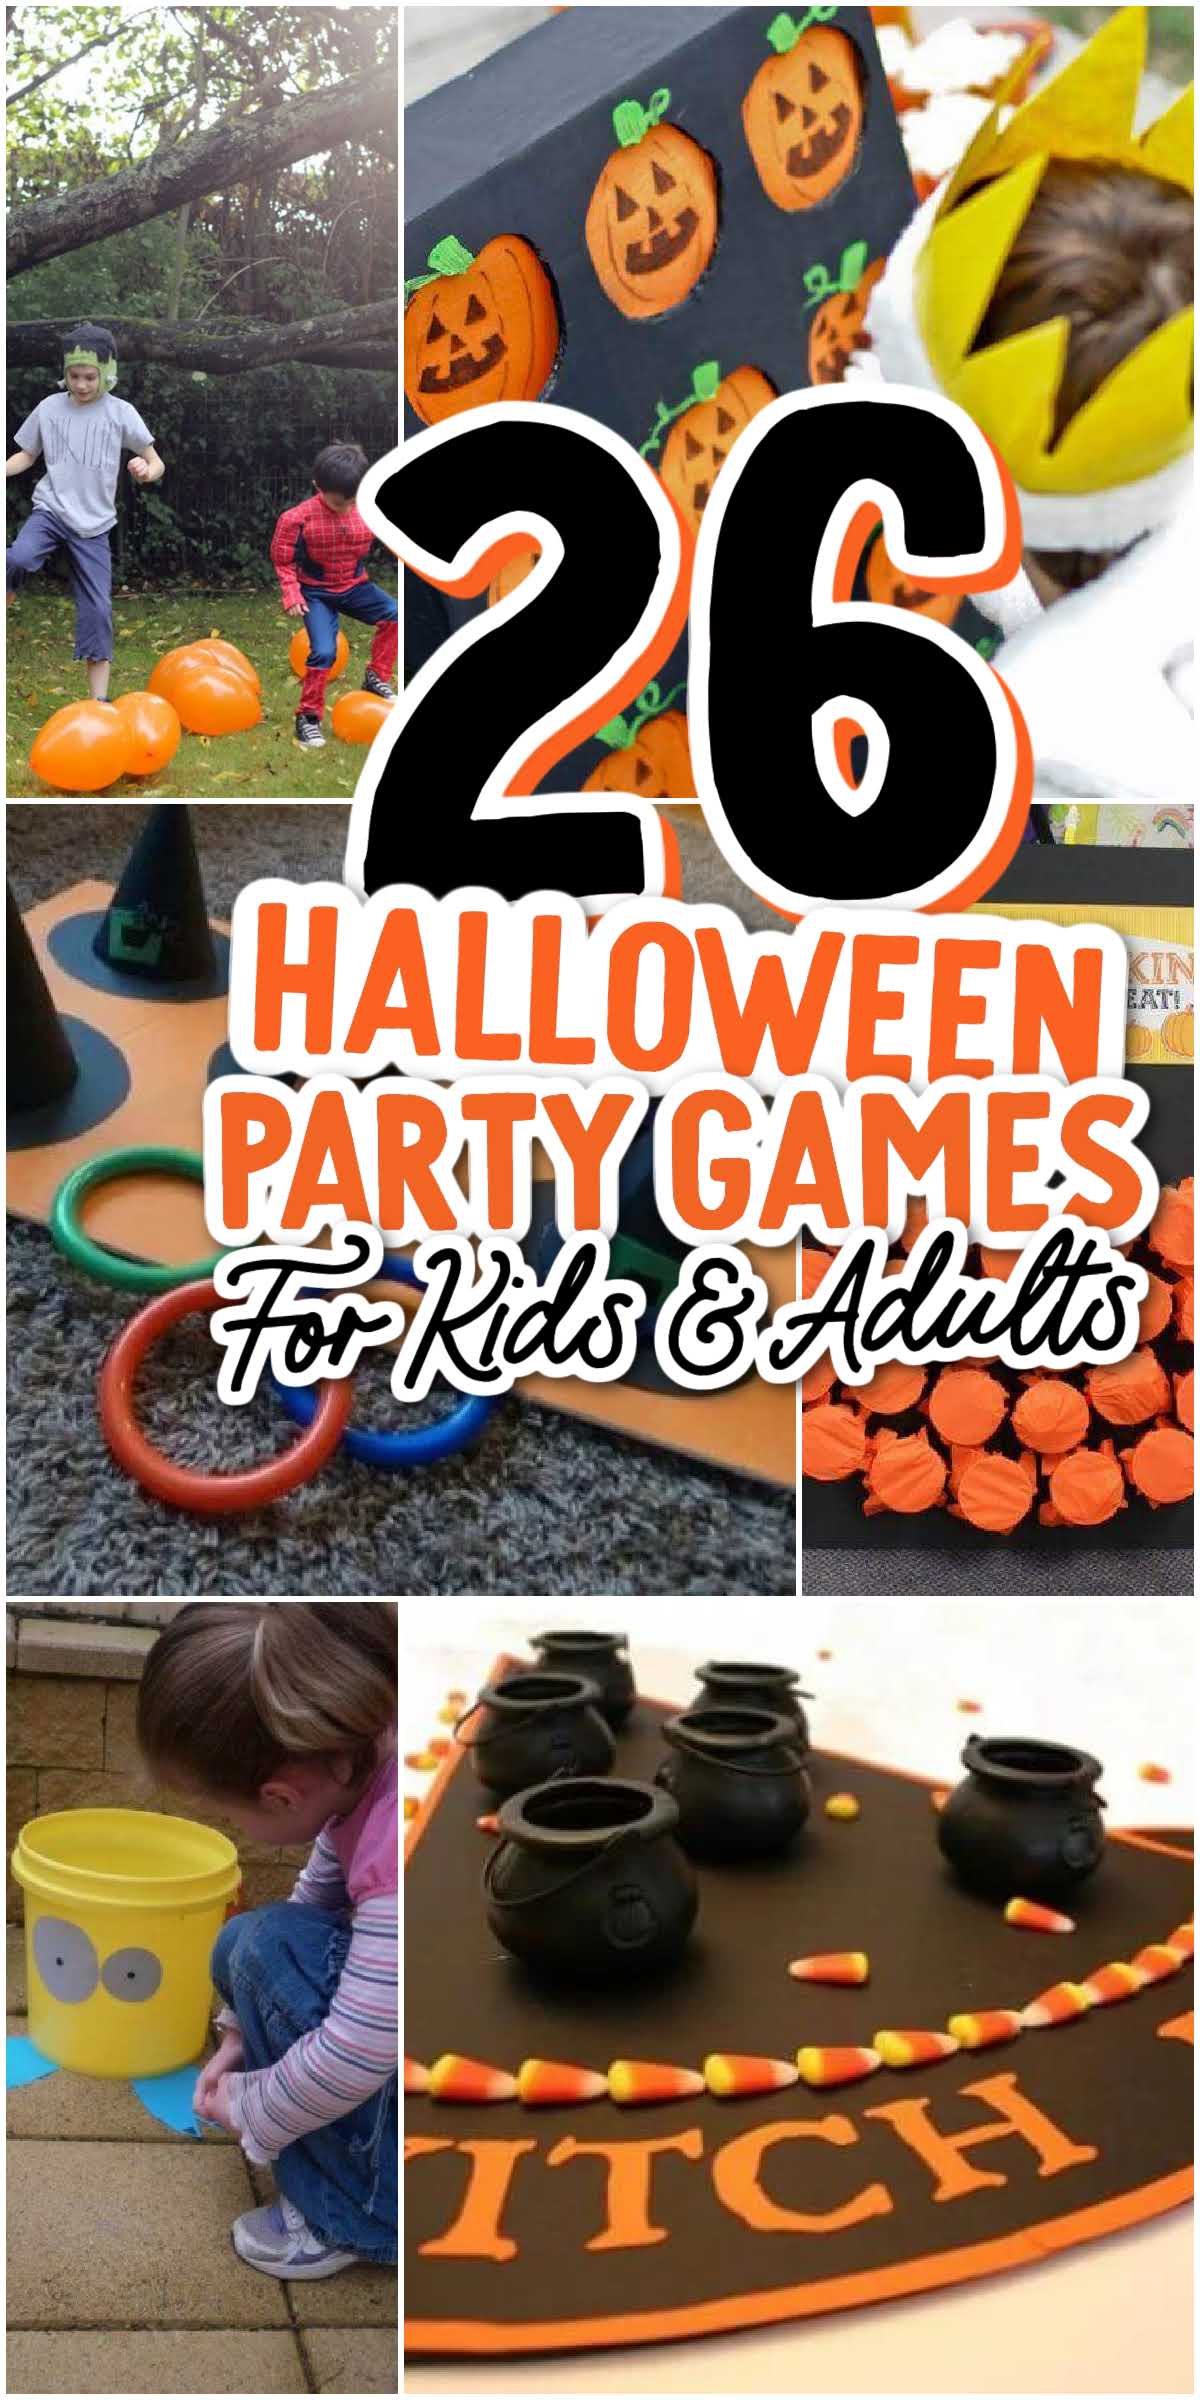 26 Halloween Party Games For Kids and Adults